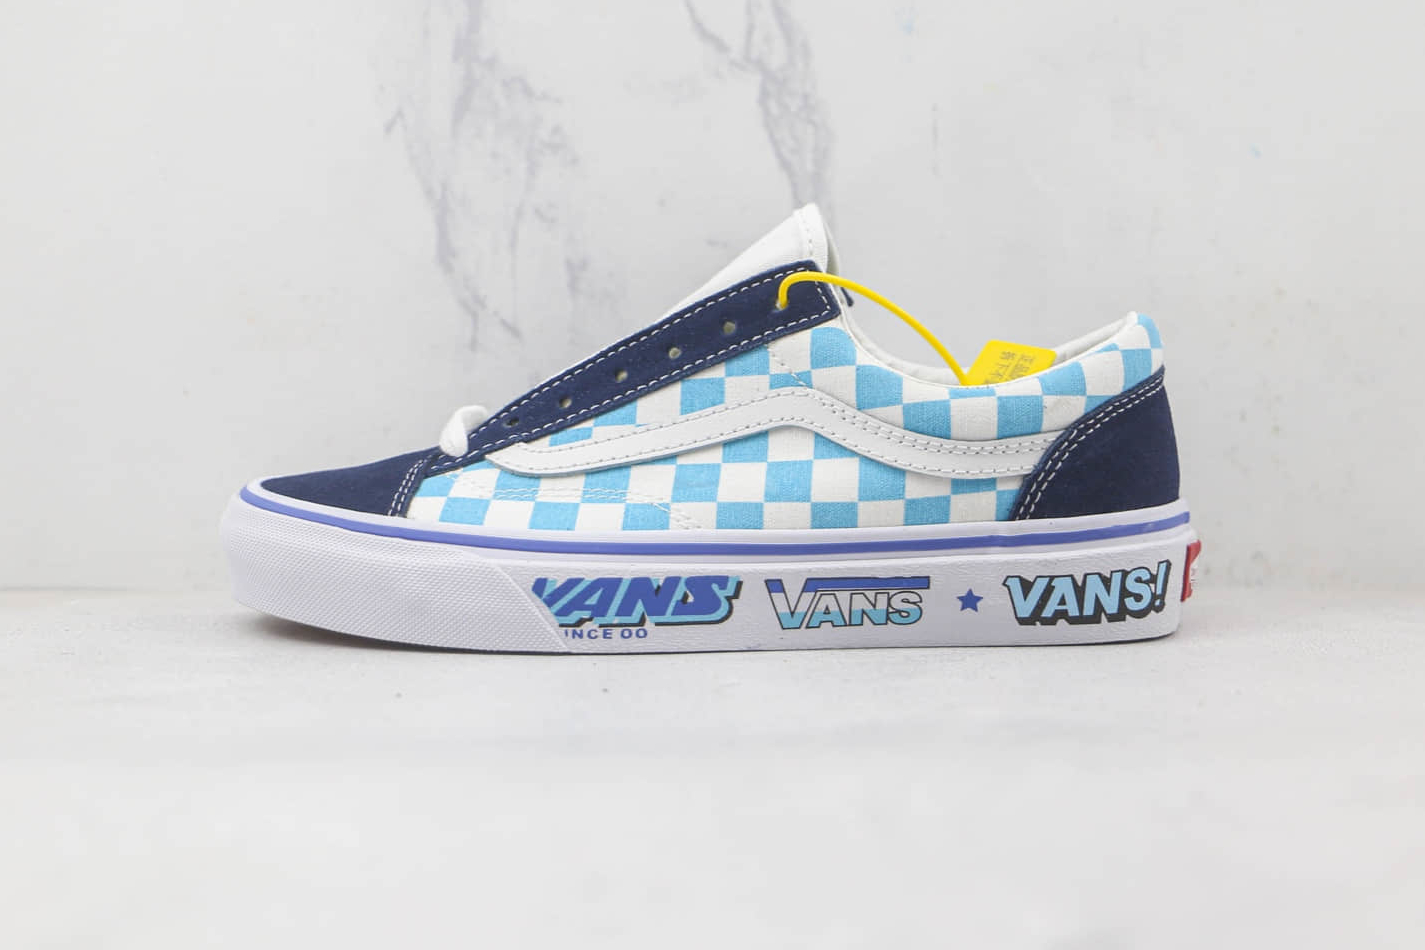 Vans Style 36 Decon: Classic Skate Shoes for a Modern Edge